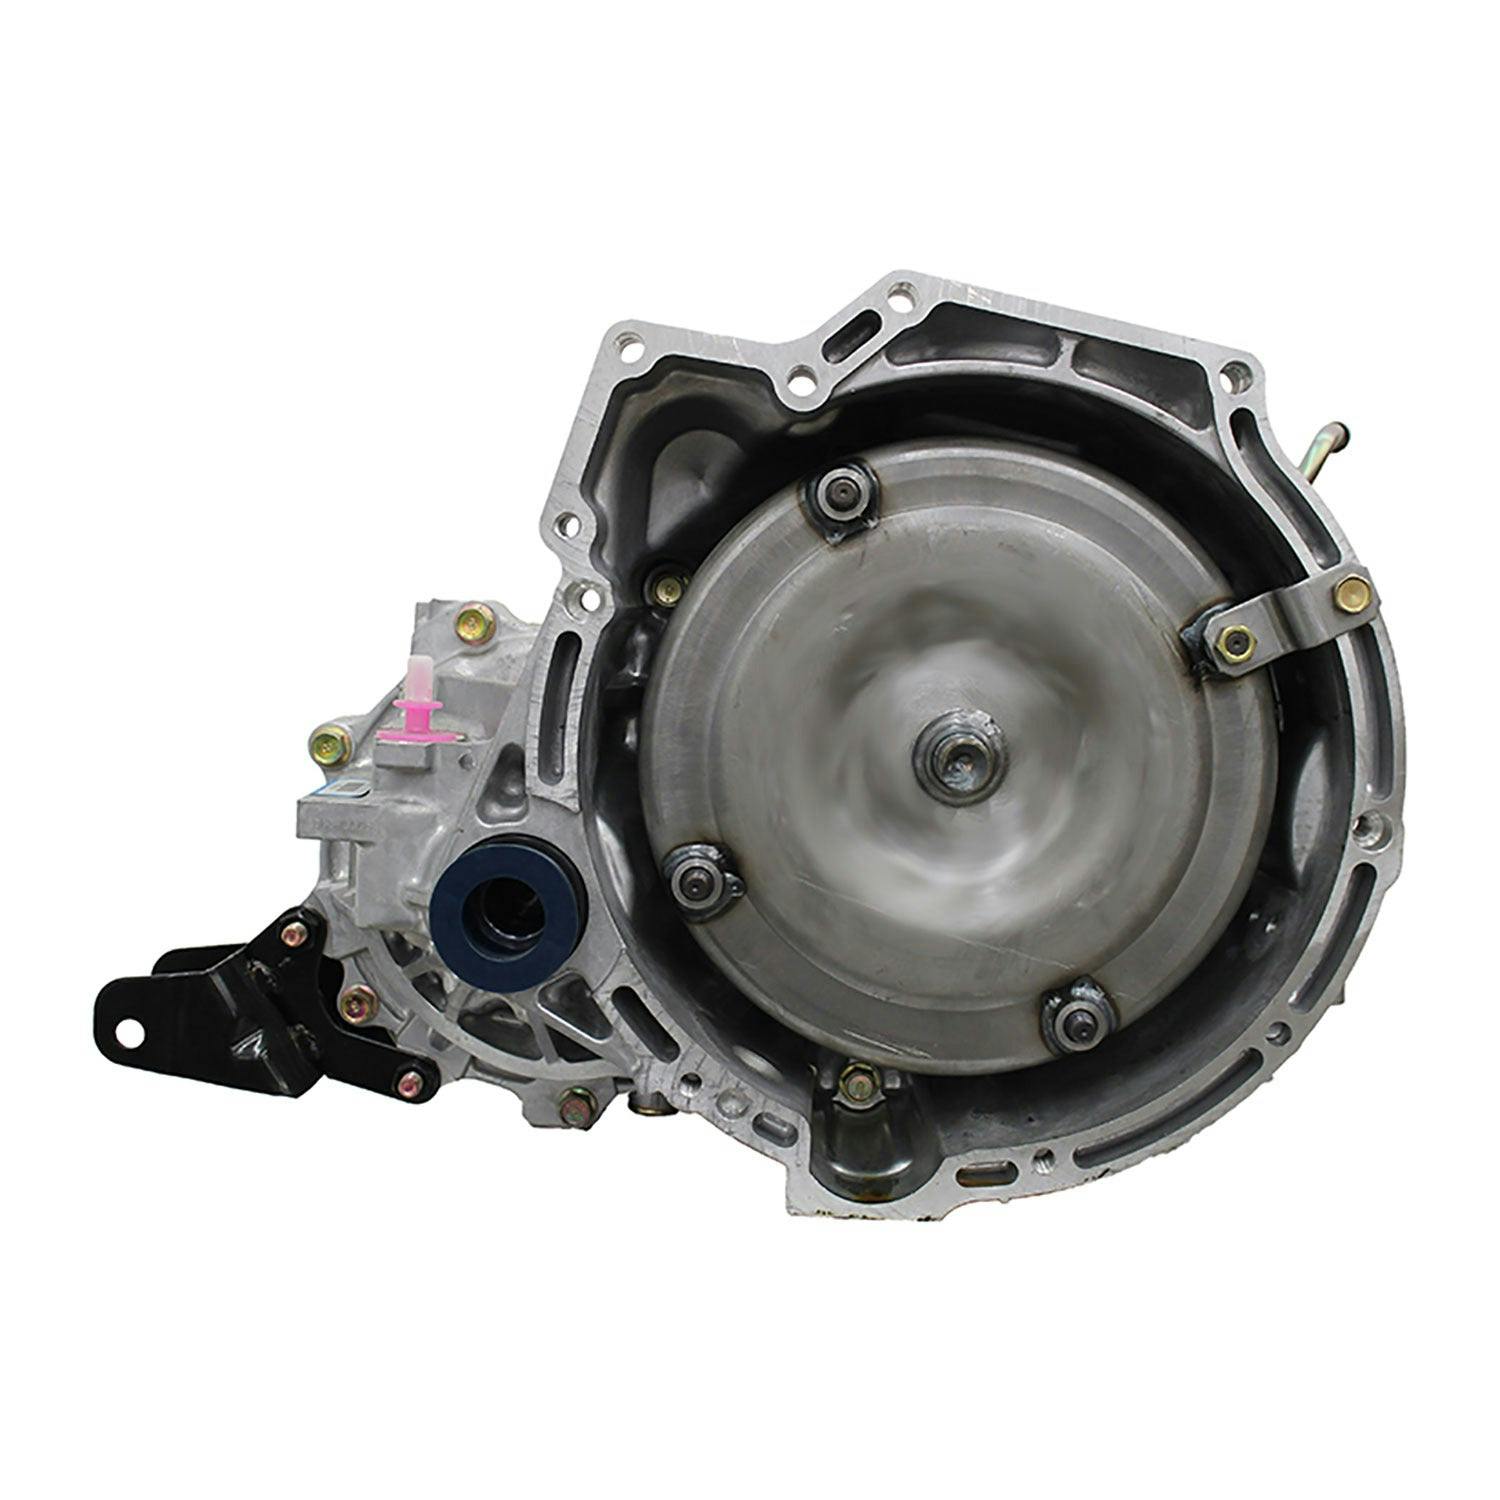 Automatic Transmission for 1997-1998 Mazda Protege FWD with 1.5L Inline-4 Engine